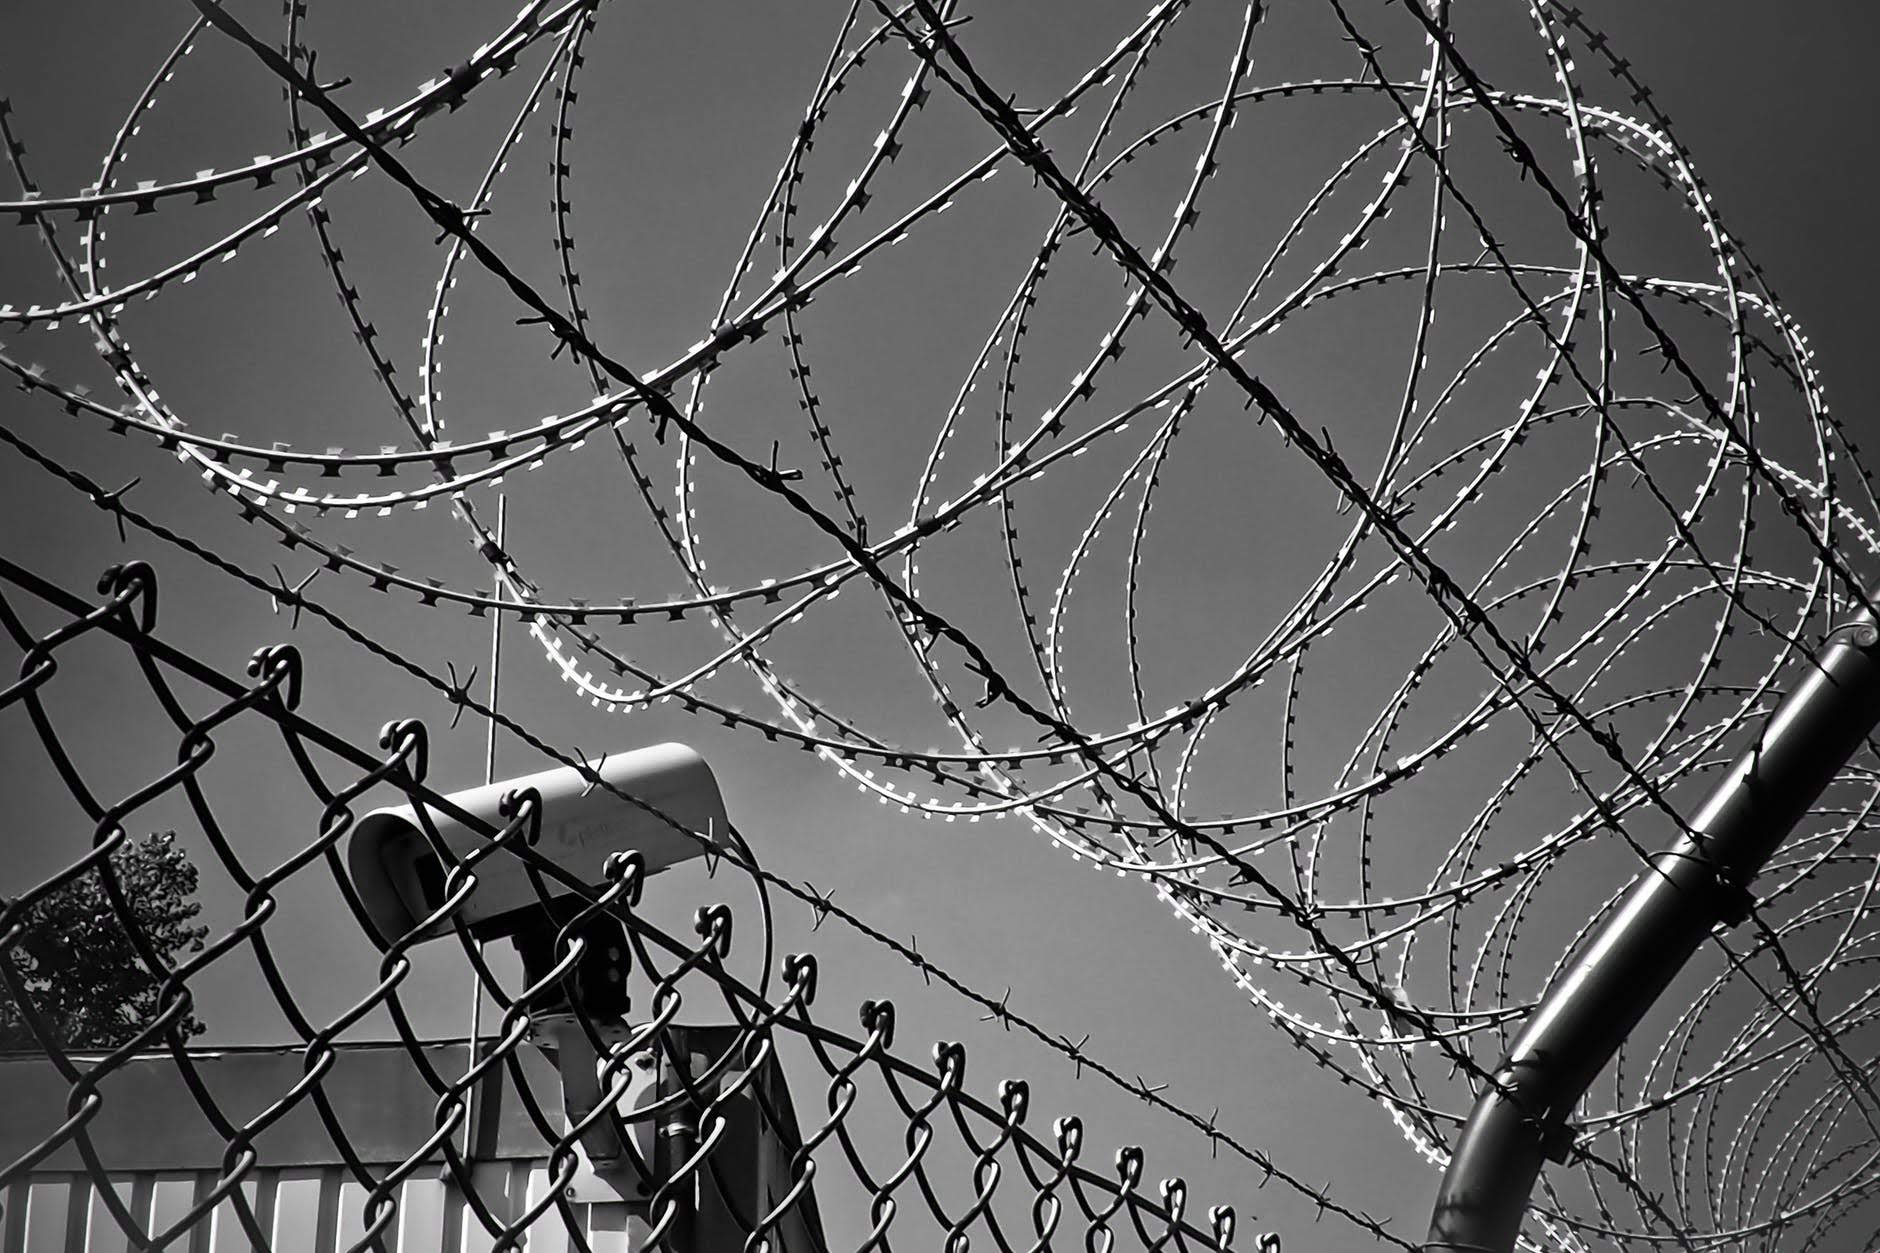 black and white image of barbed wire on fence and security camera